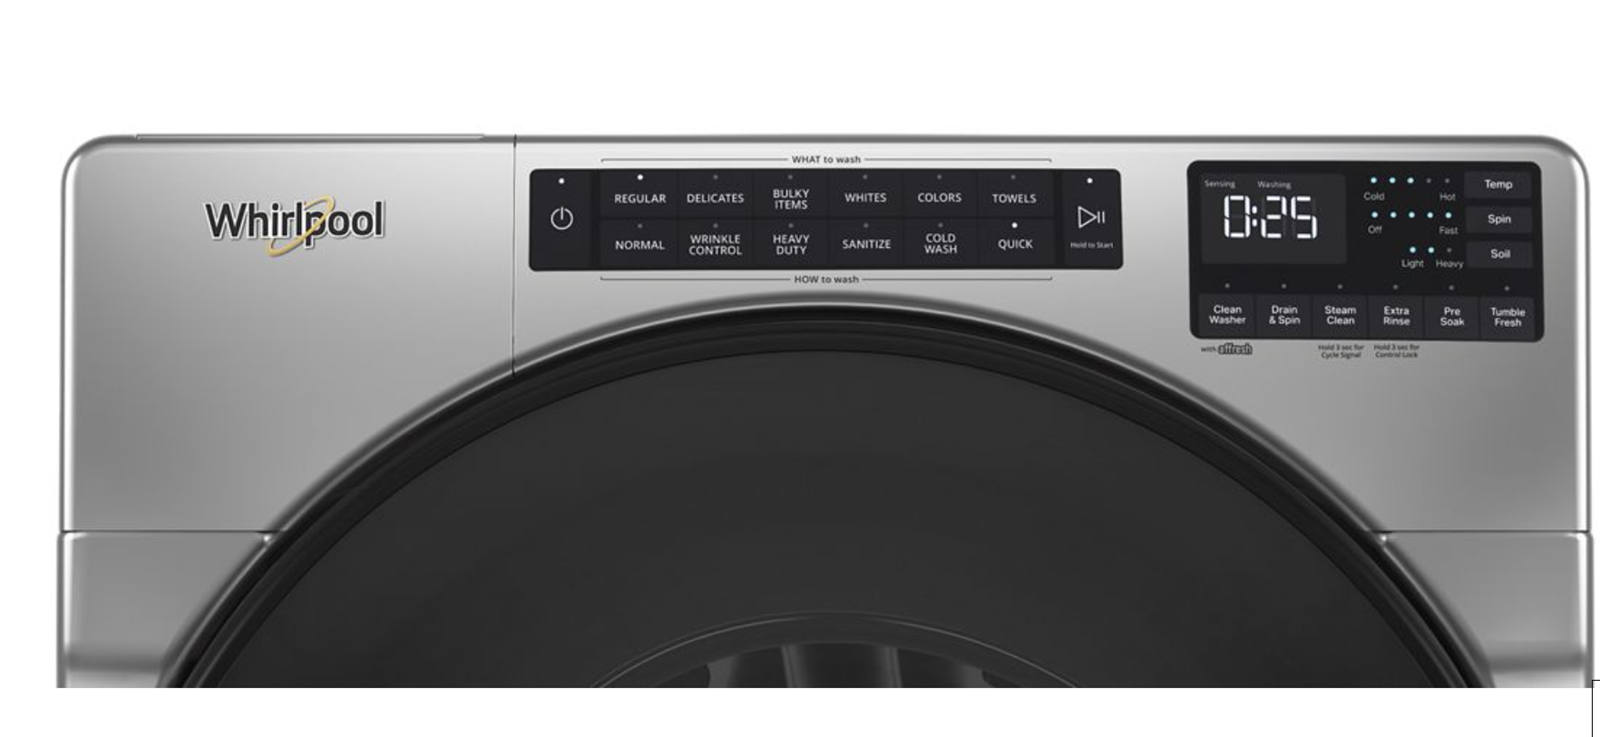 Whirlpool WFW5605MC- 4.5 cu. ft. Front Load Washer with Steam, Quick Wash Cycle and Vibration Control Technology in Chrome Shadow 3